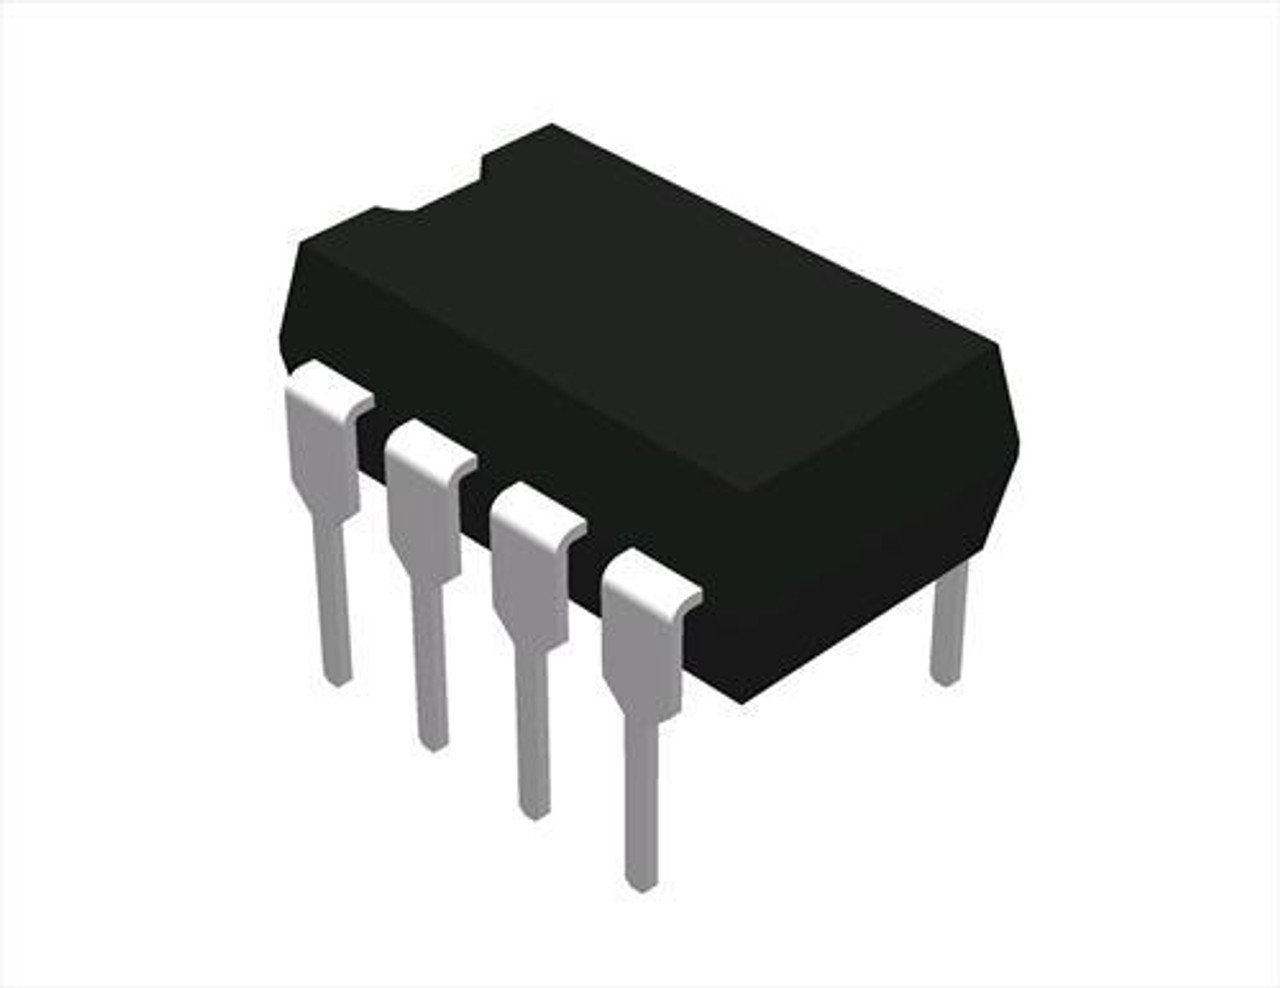 L6385 ; IGBT and MOSFET Gate High / Low Side Driver 580V 0.4A, DIP-8